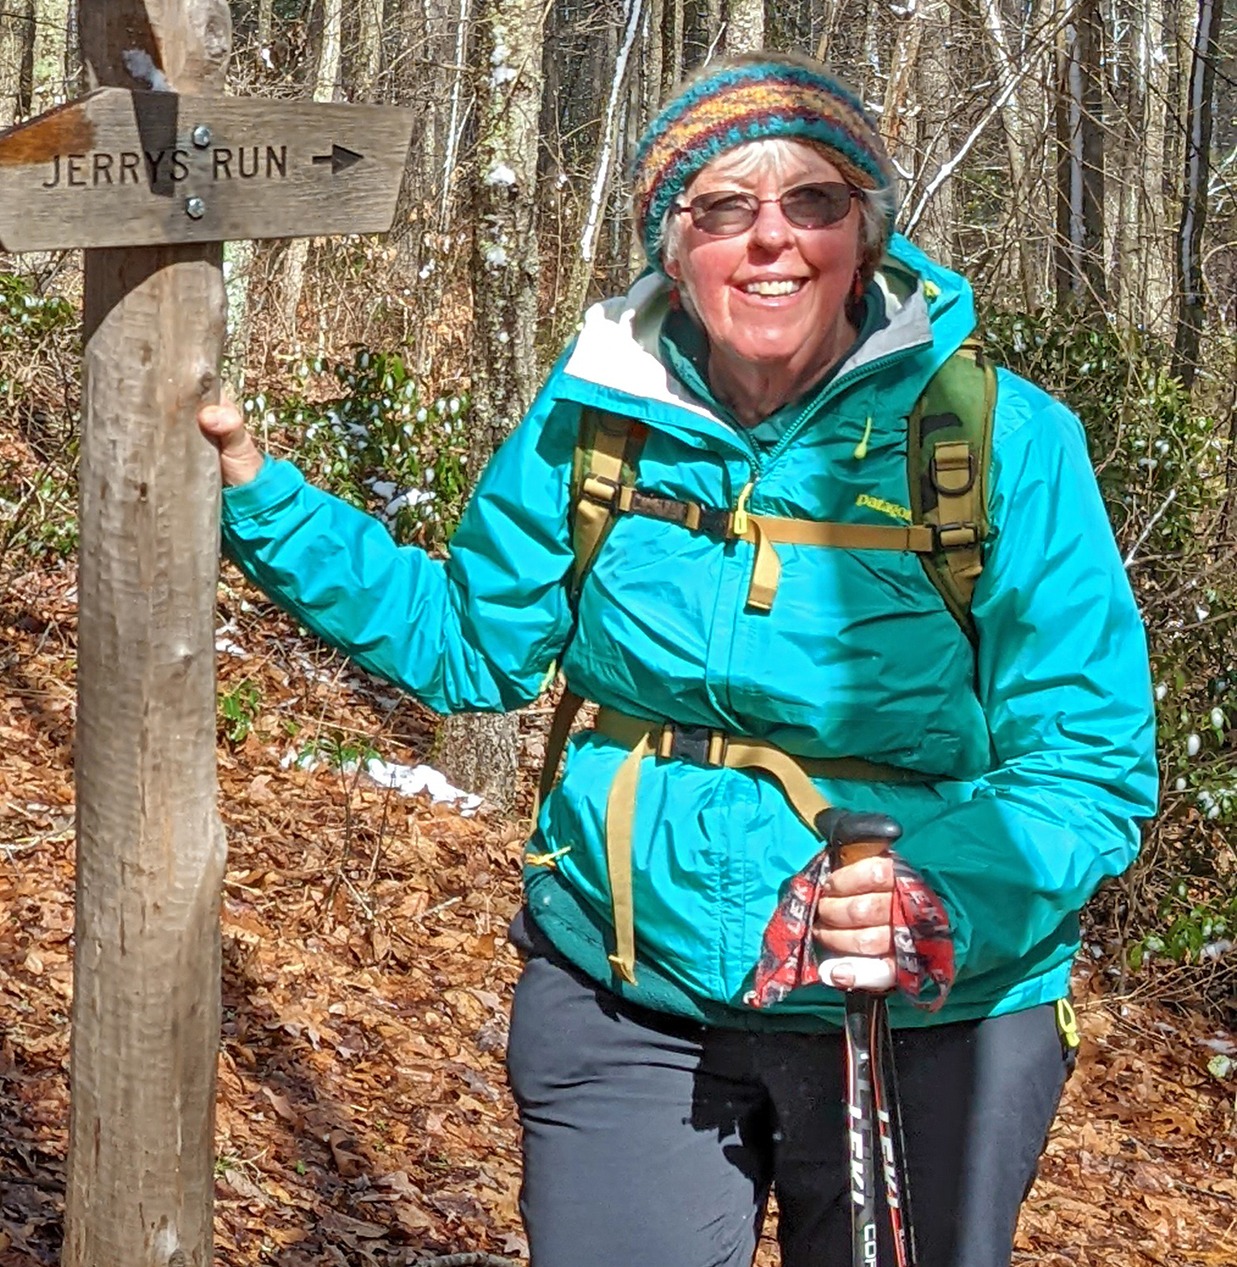 Lynn Cameron wearing cold weather hiking gear and holding hiking polls leaning on a sign post that says 'Jerry's Run.'